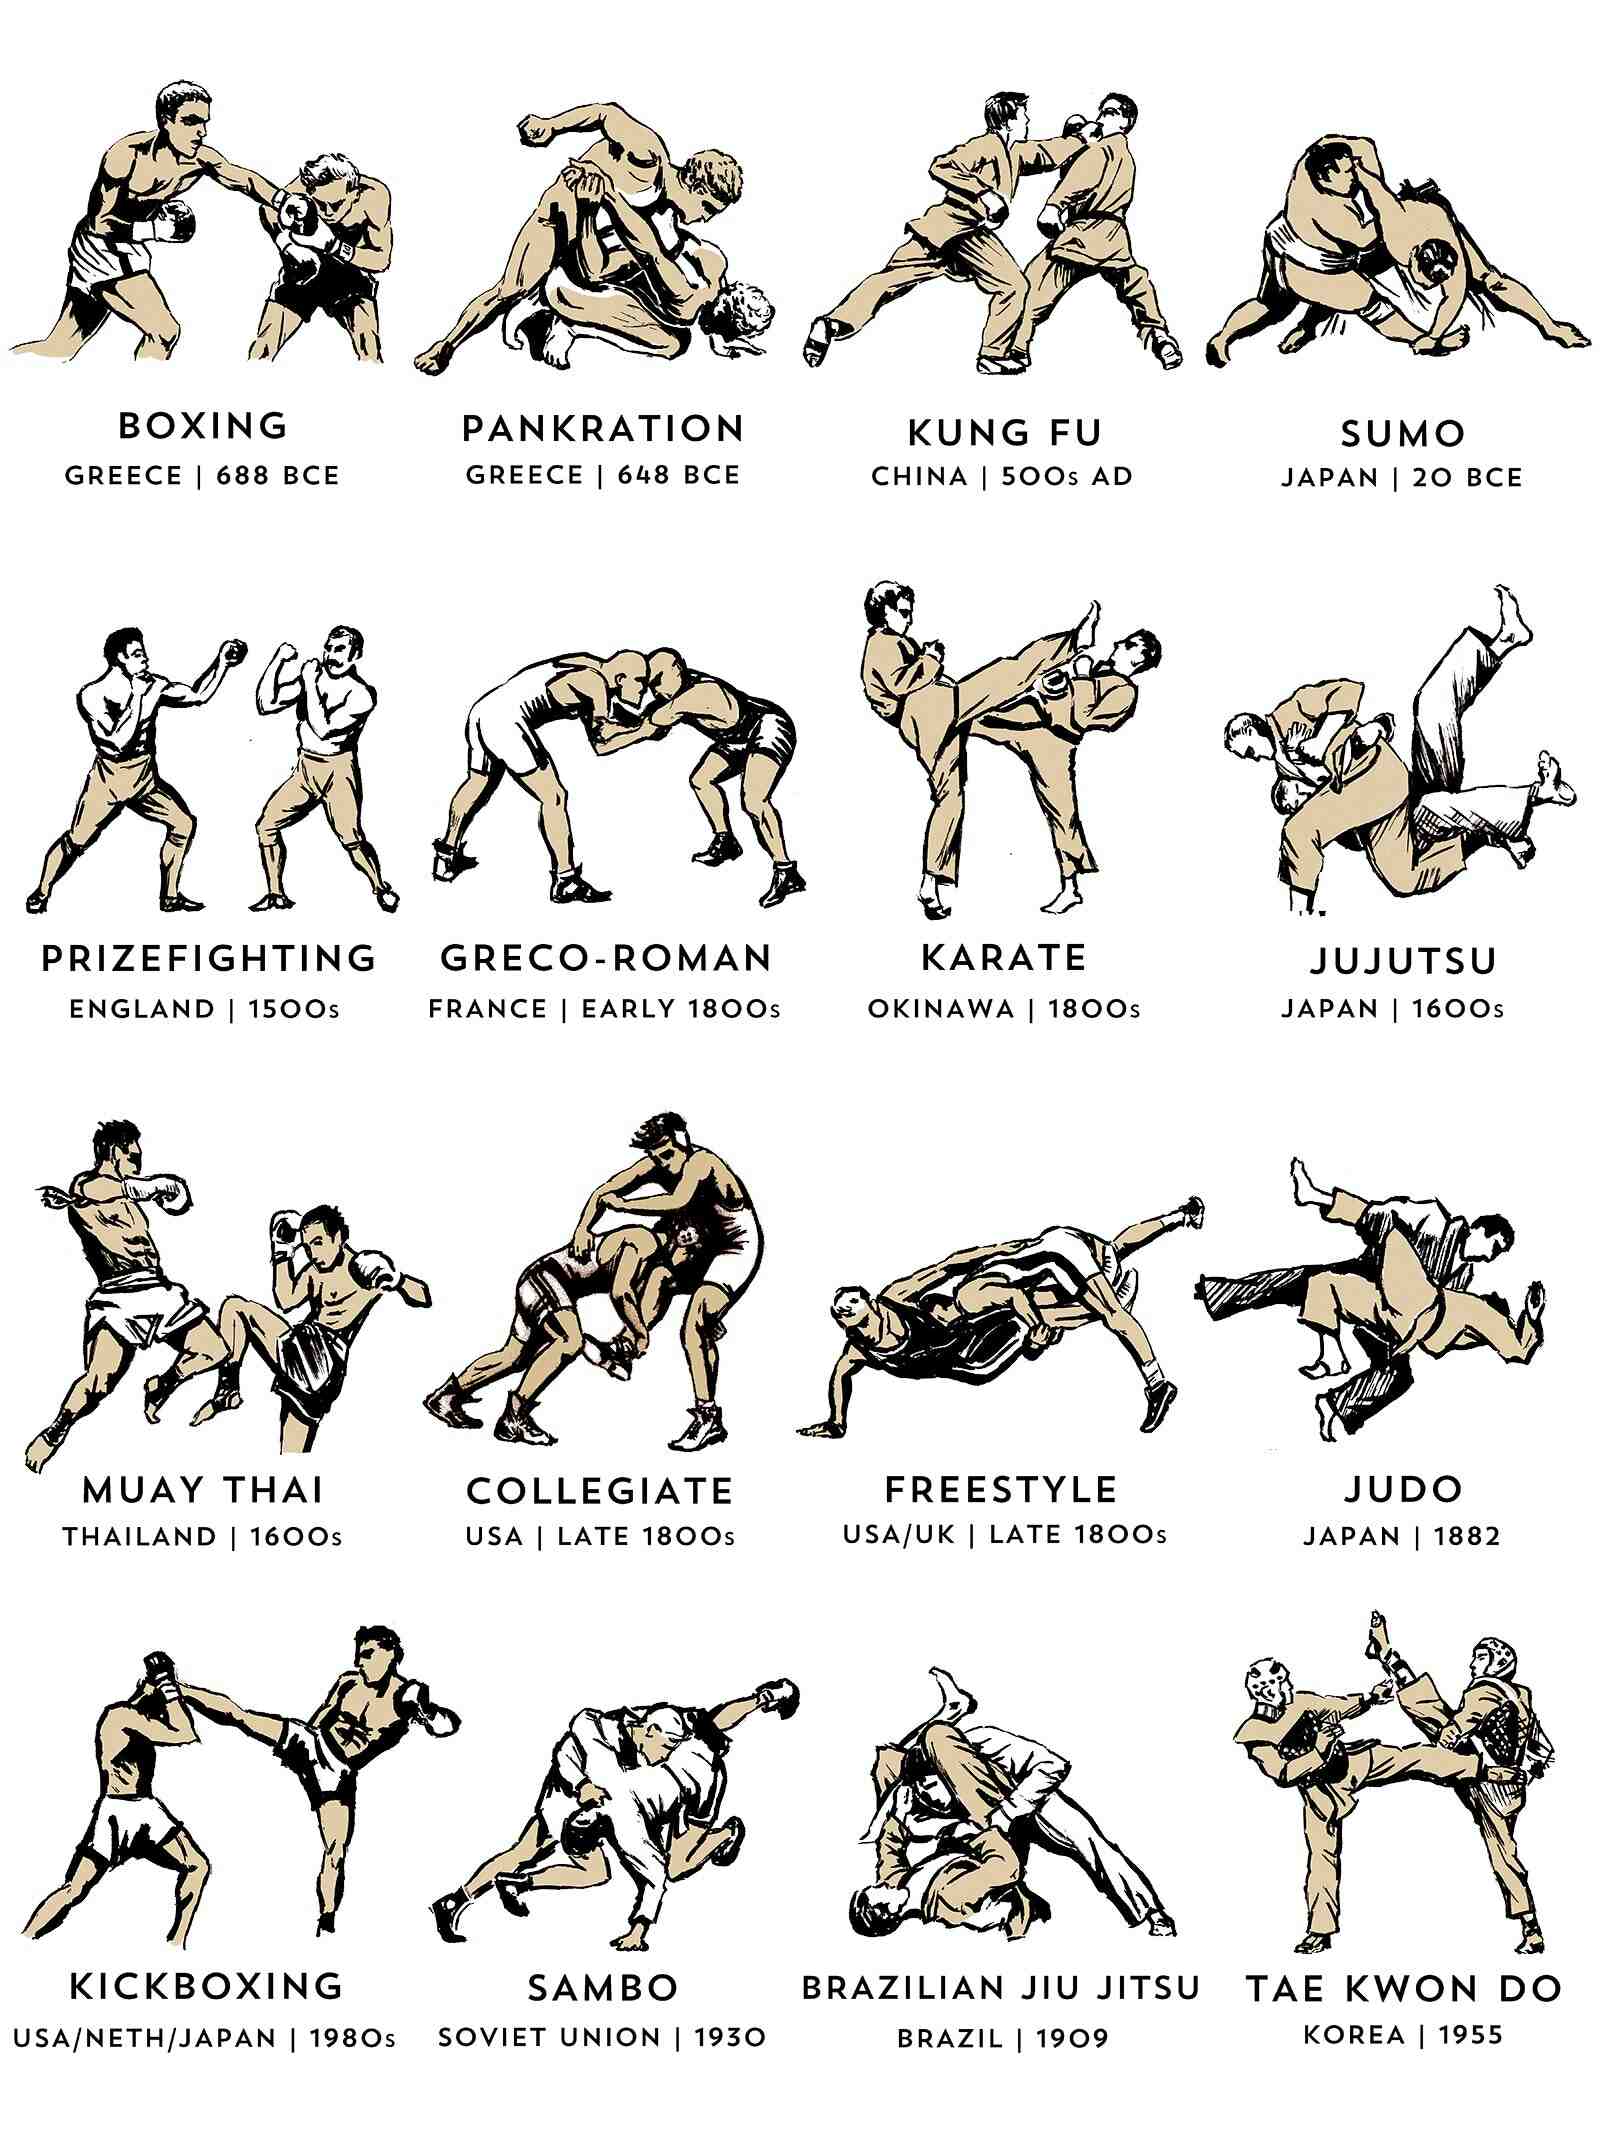 How many types of martial arts is there?